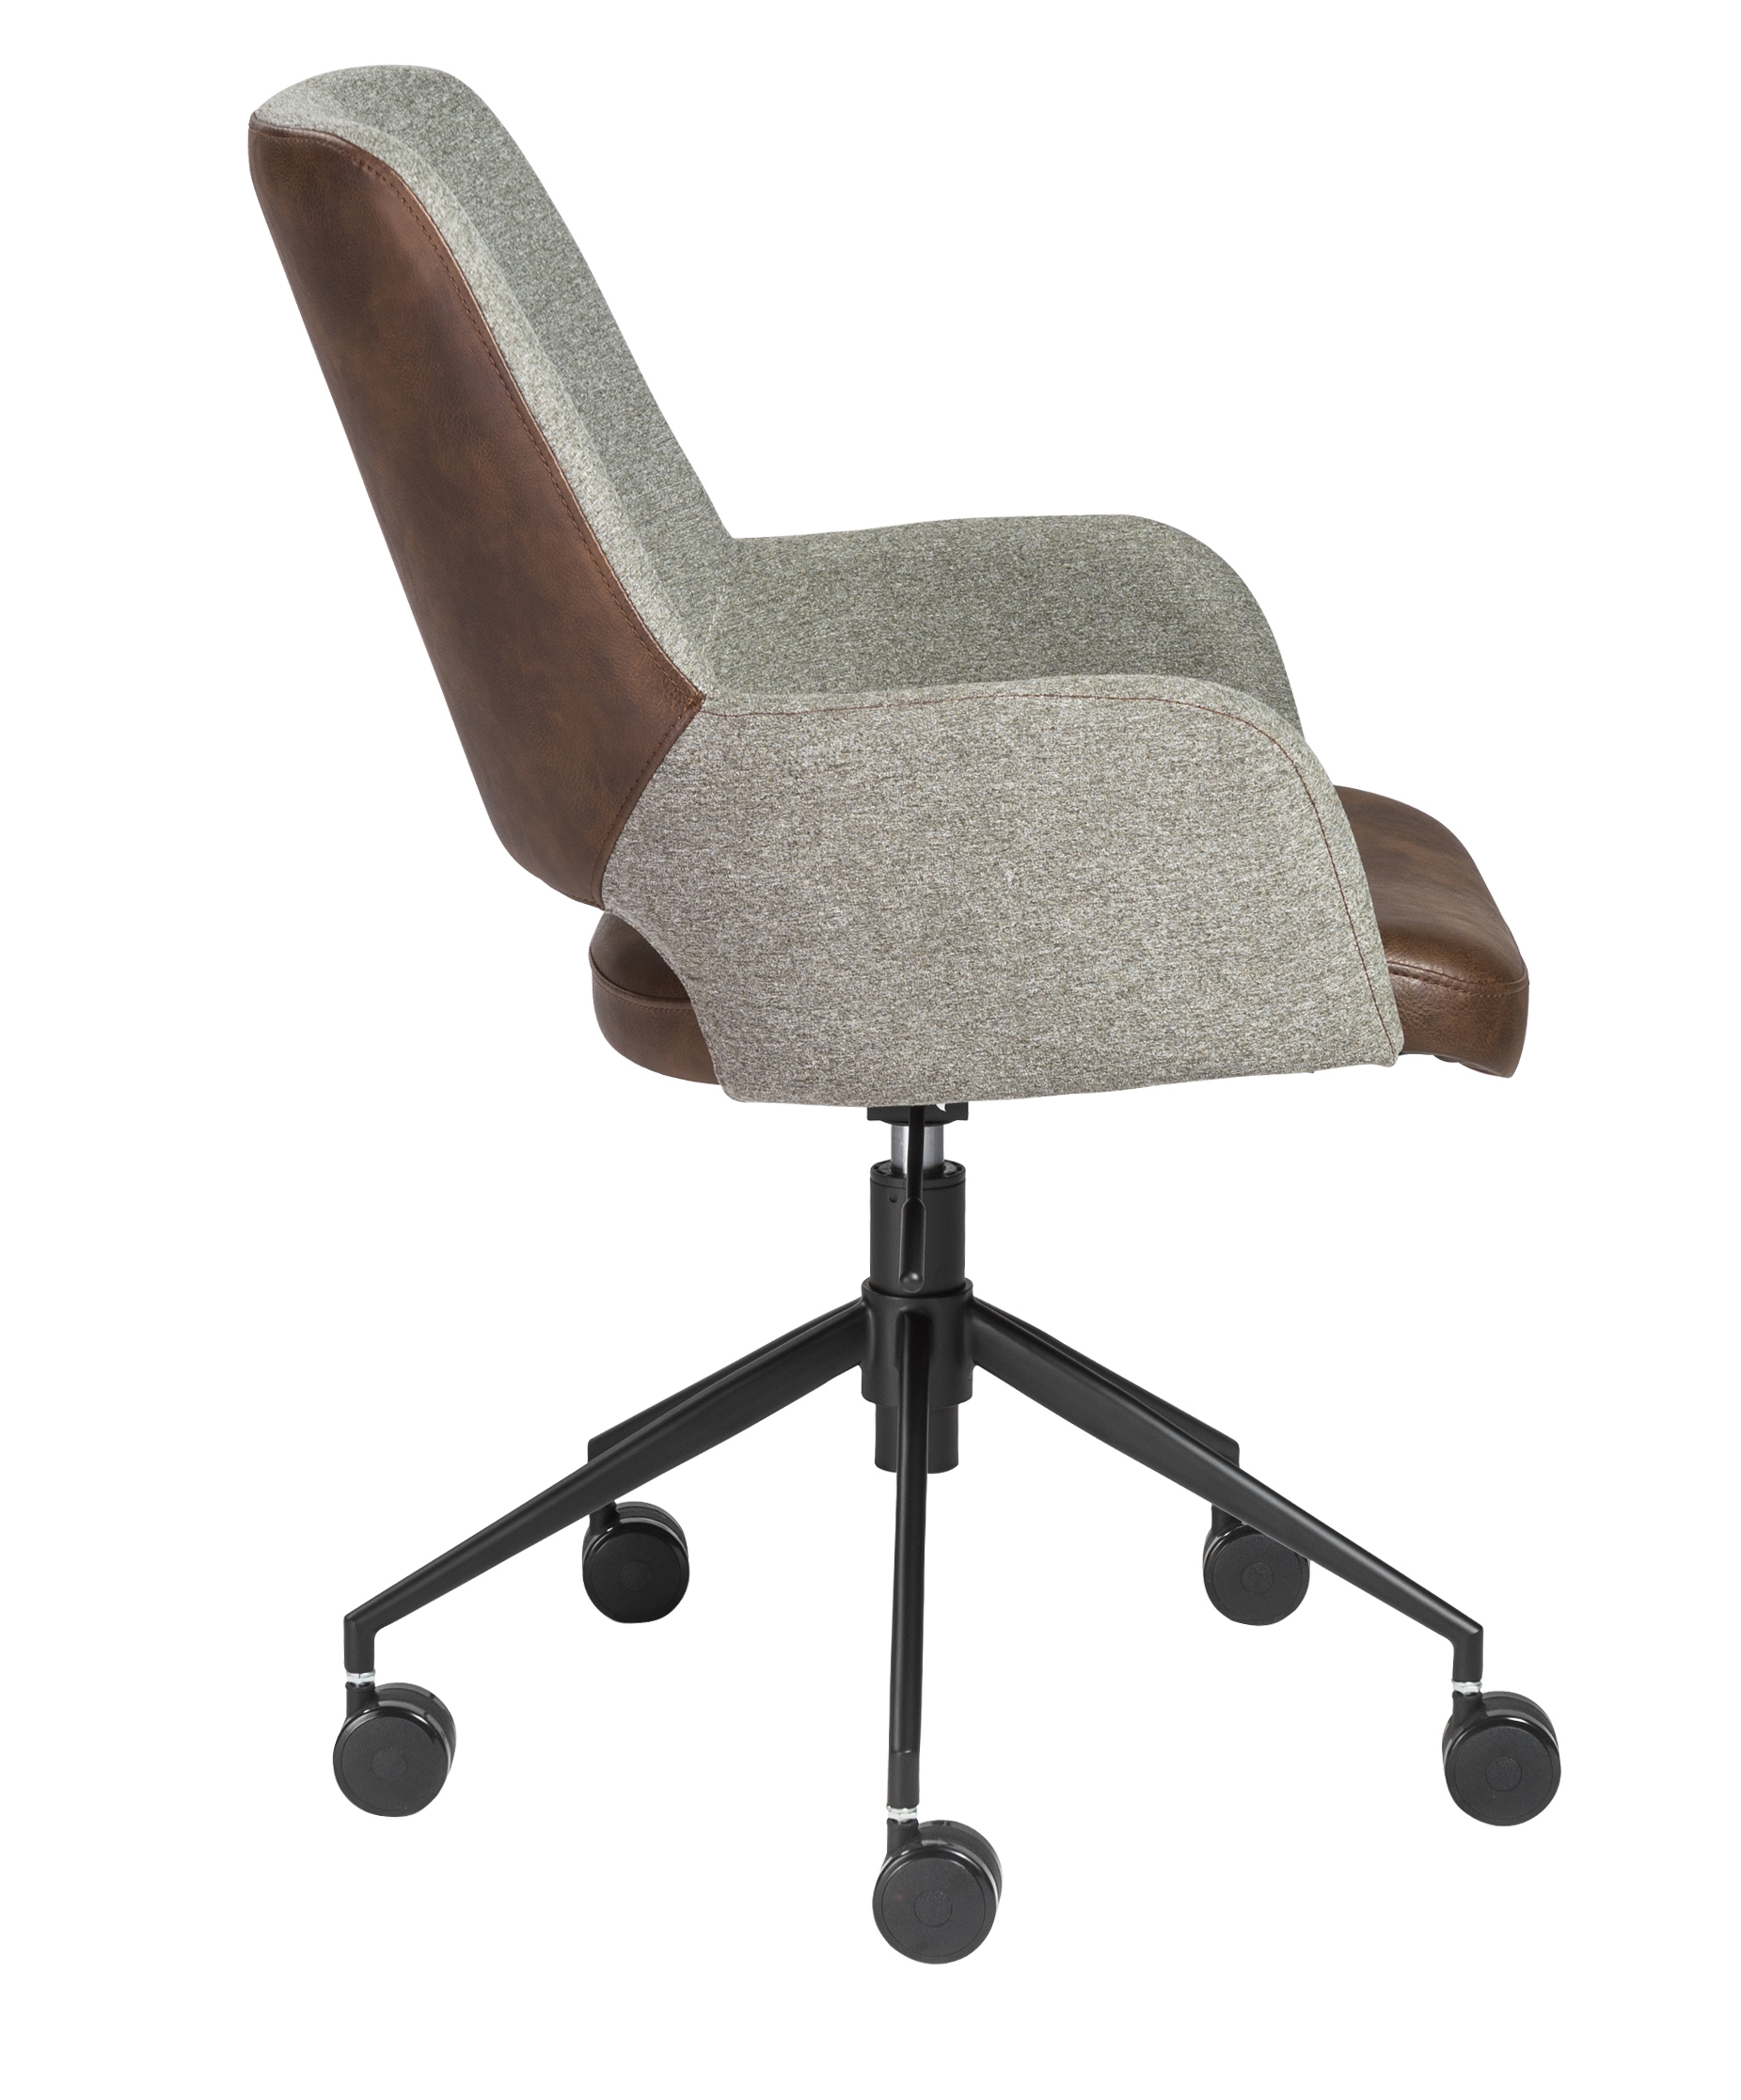 Randy Office Chair - Image 2